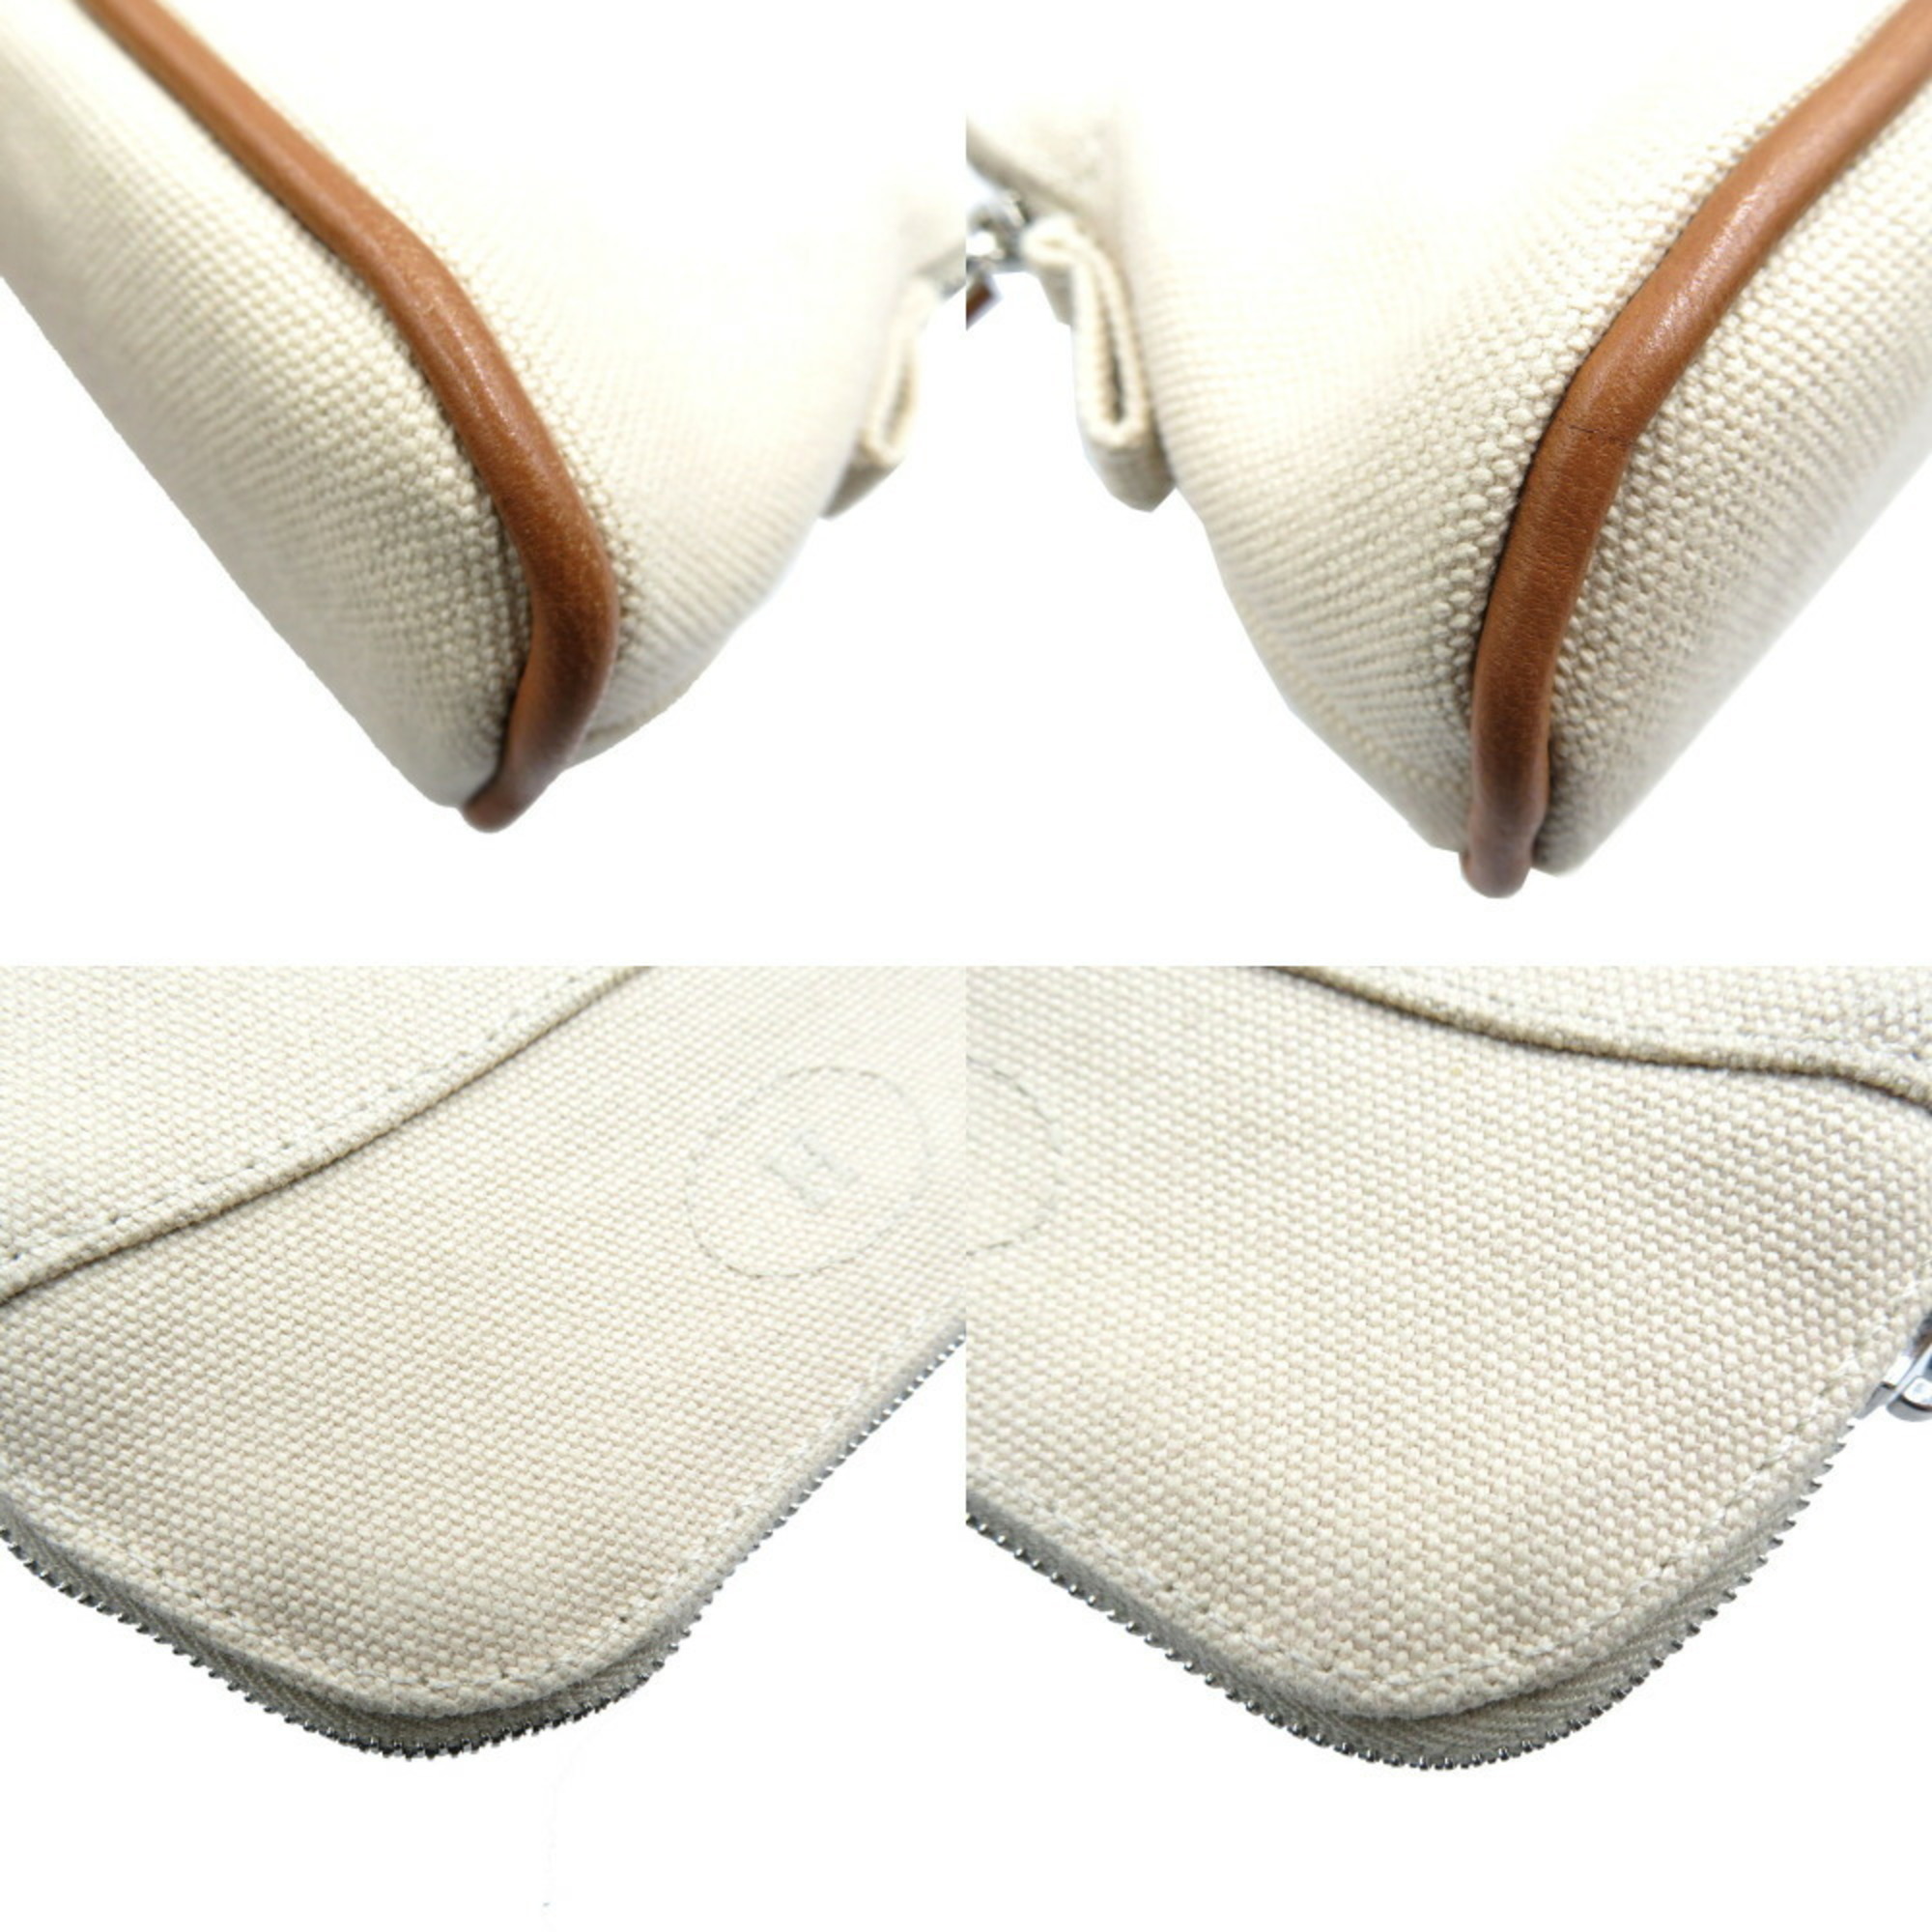 Hermes Bolide Pouch Canvas Natural Beige 0076HERMES 6A0076ZGA5